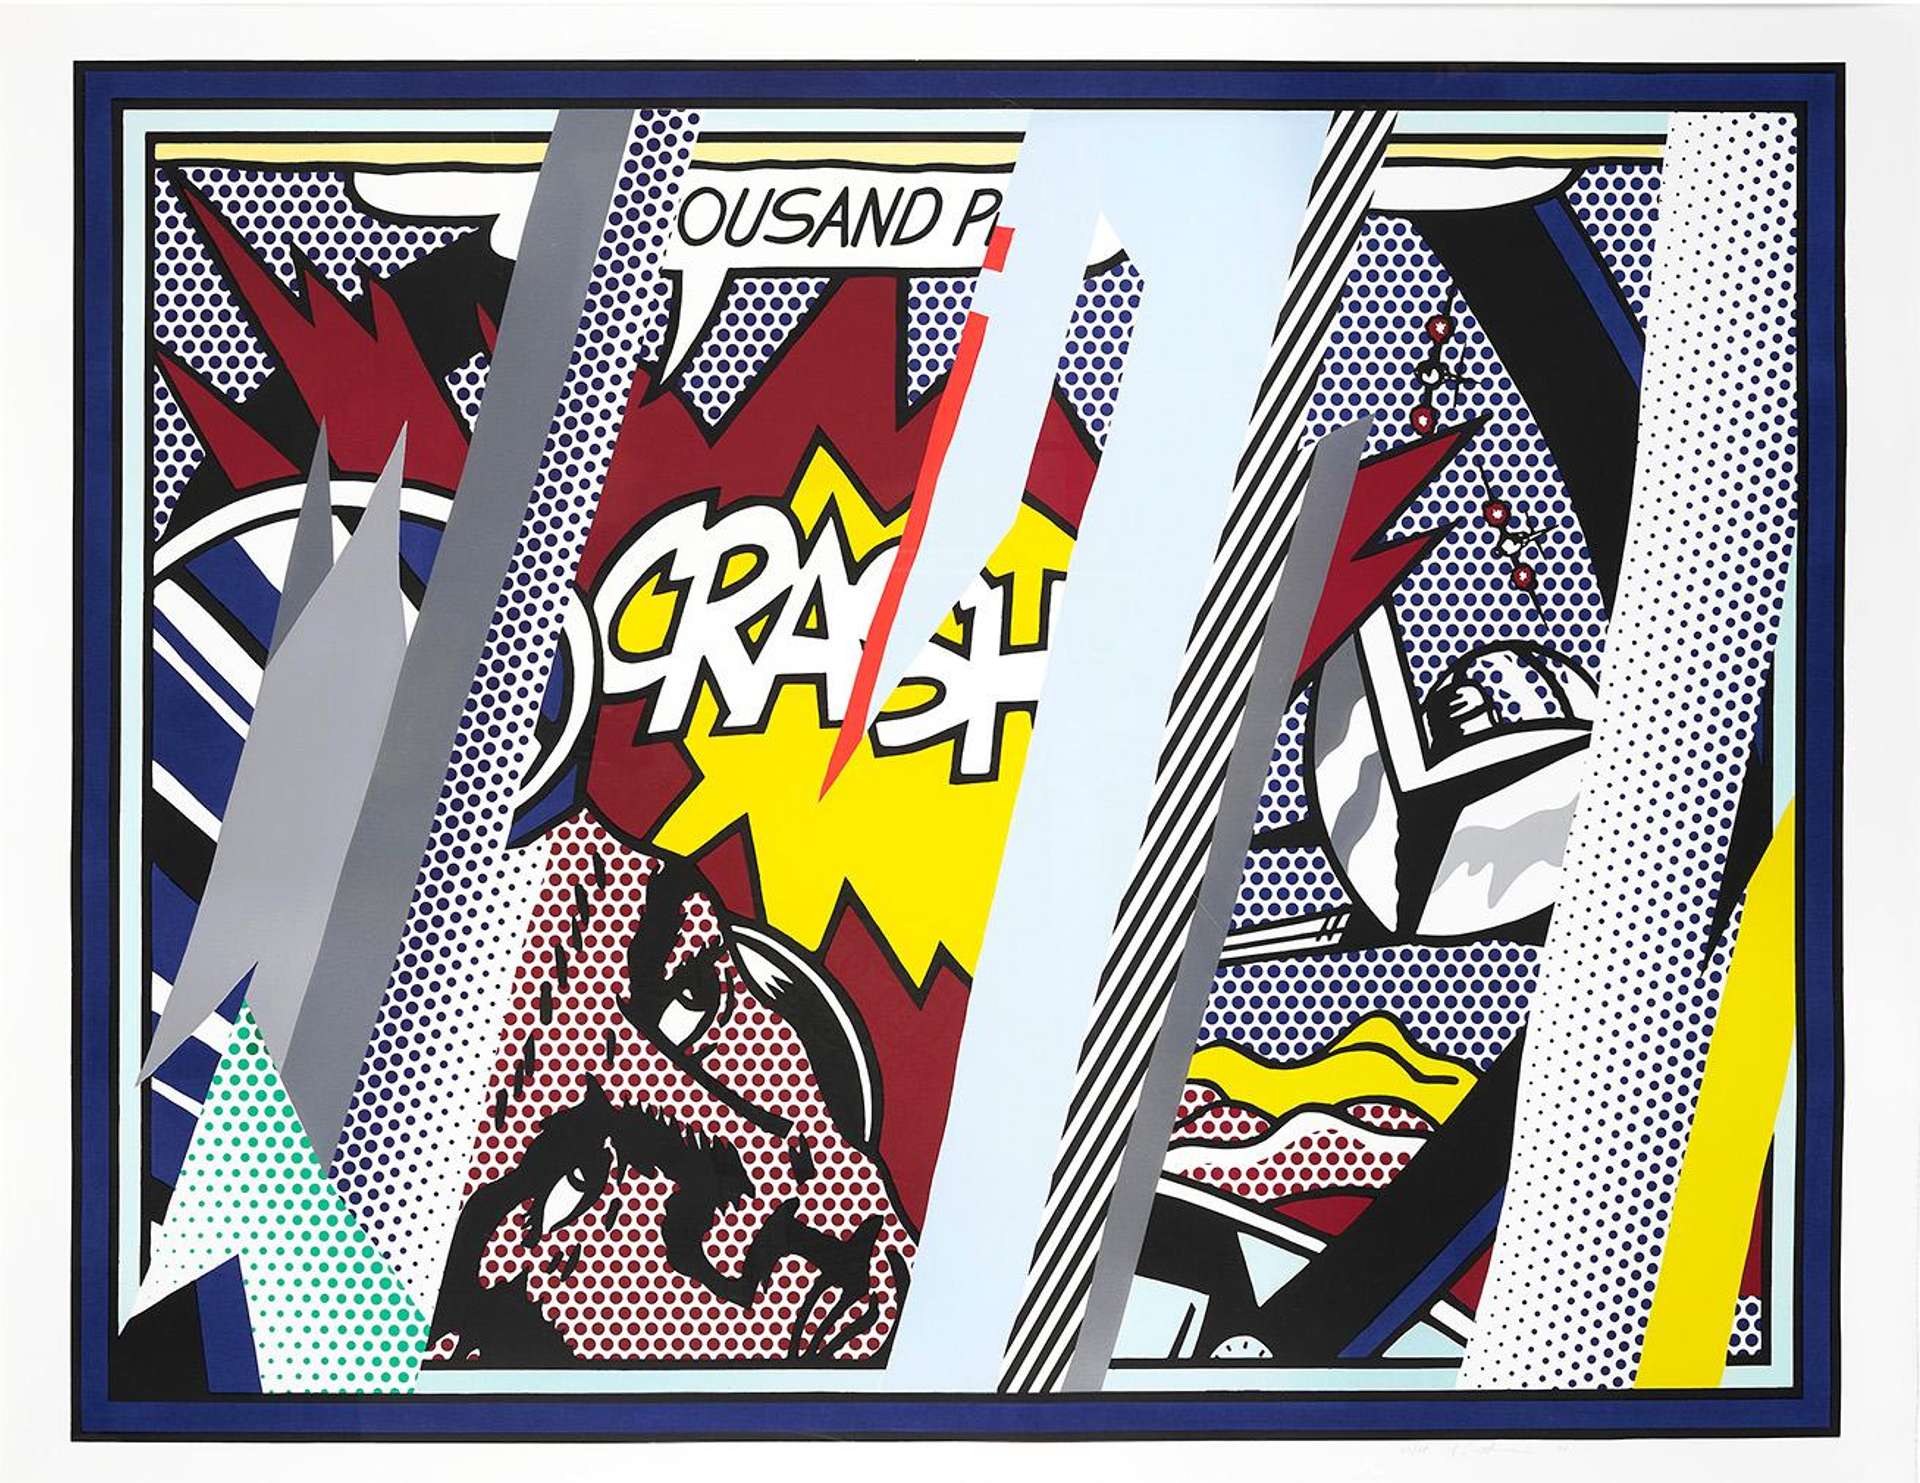 A colourful lithograph print titled "Reflections on Crash" by Roy Lichtenstein, featuring a stylised representation of a car crash with fragmented images of a car and driver visible in the reflection of a rearview mirror.